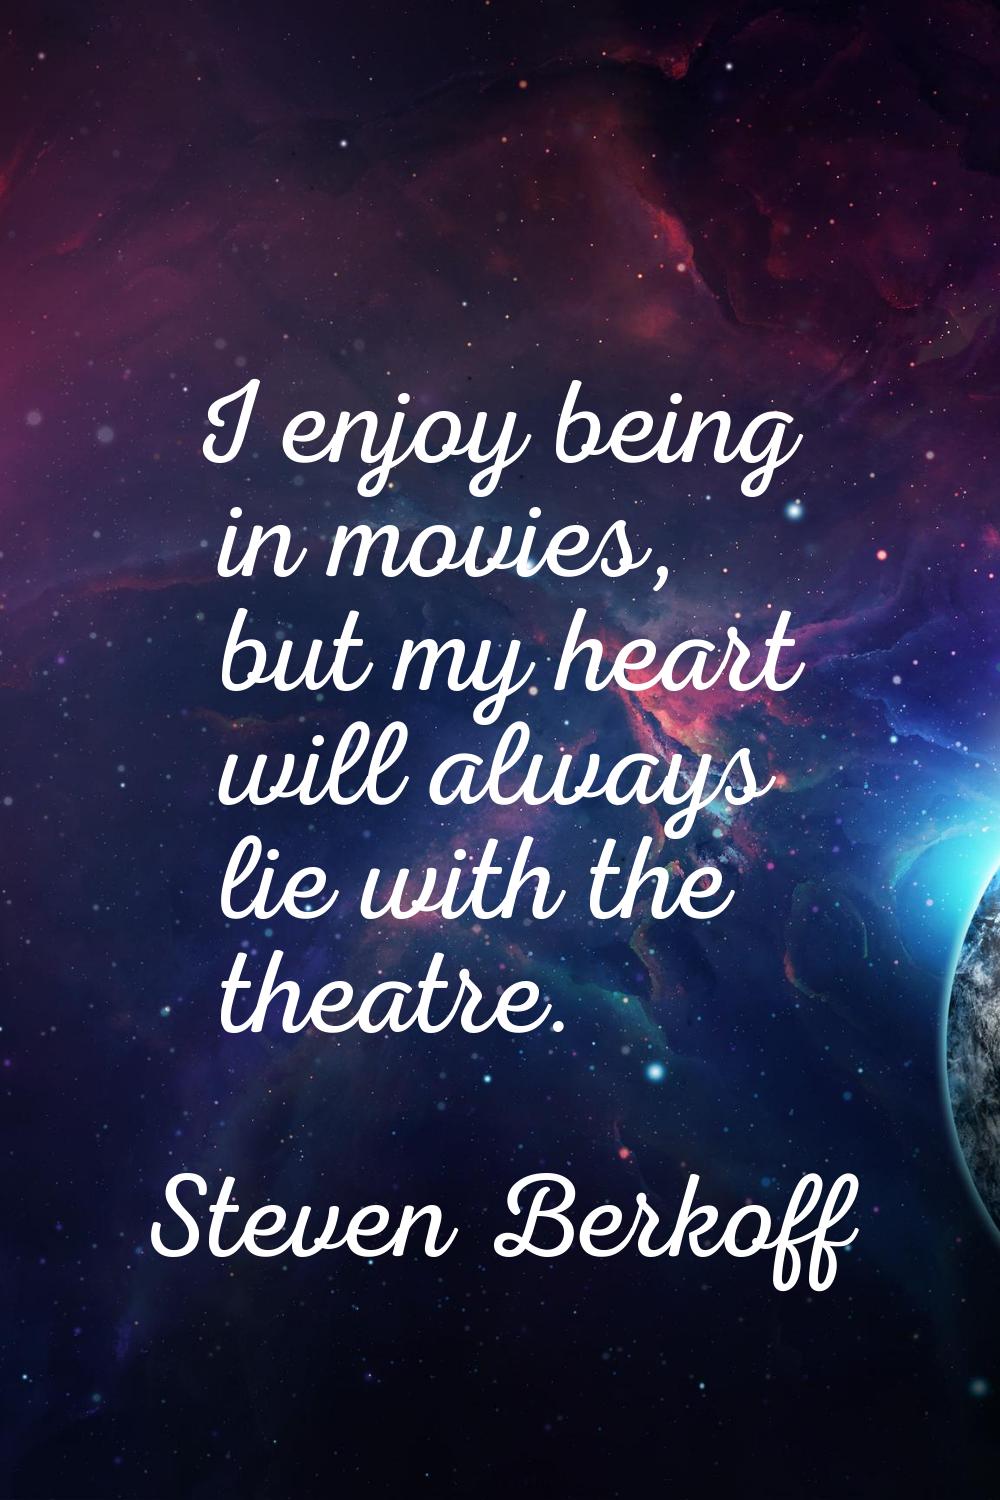 I enjoy being in movies, but my heart will always lie with the theatre.